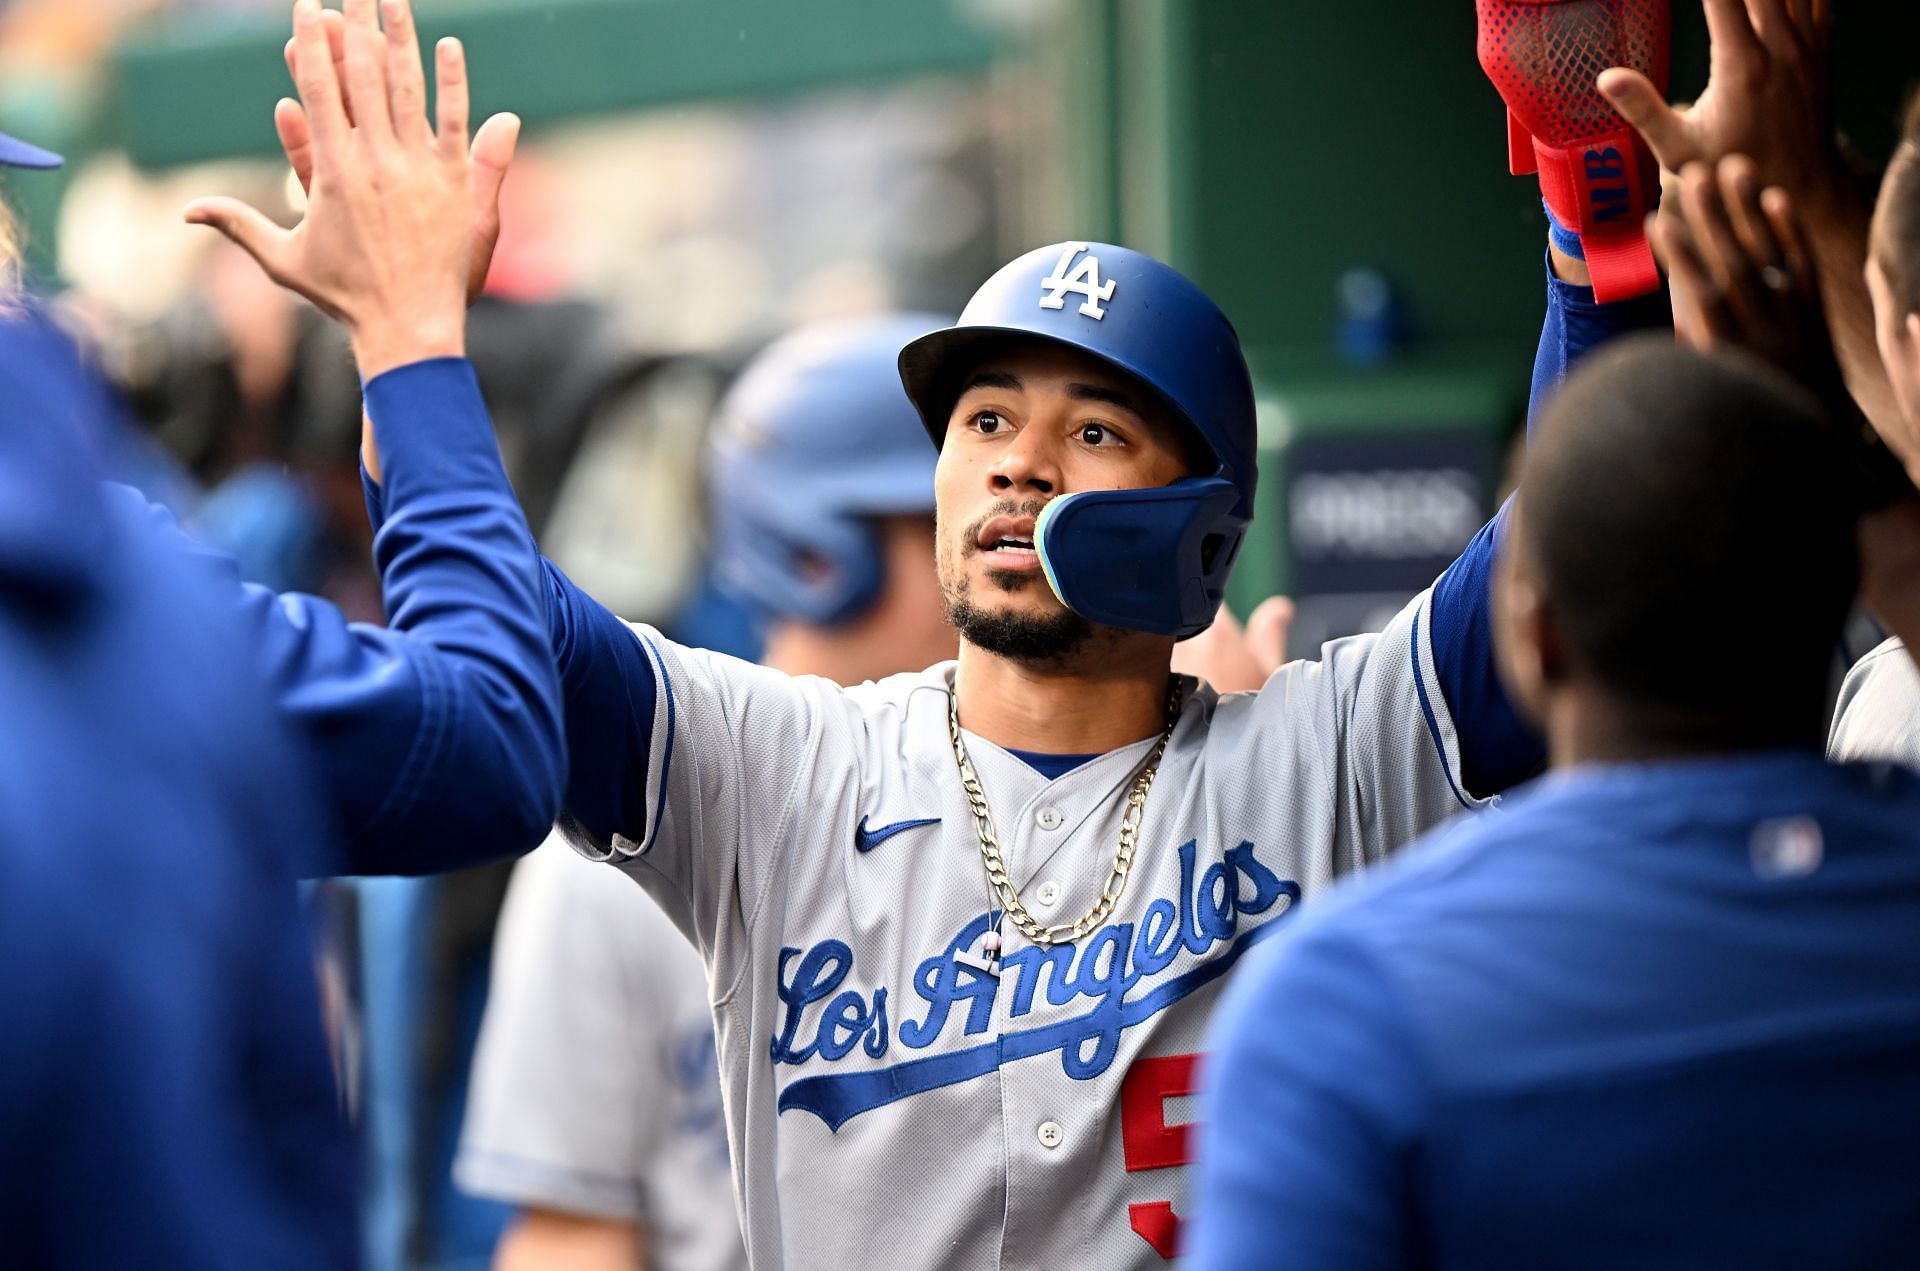 Dodgers' Mookie Betts is his harshest critic. It's what fuels him